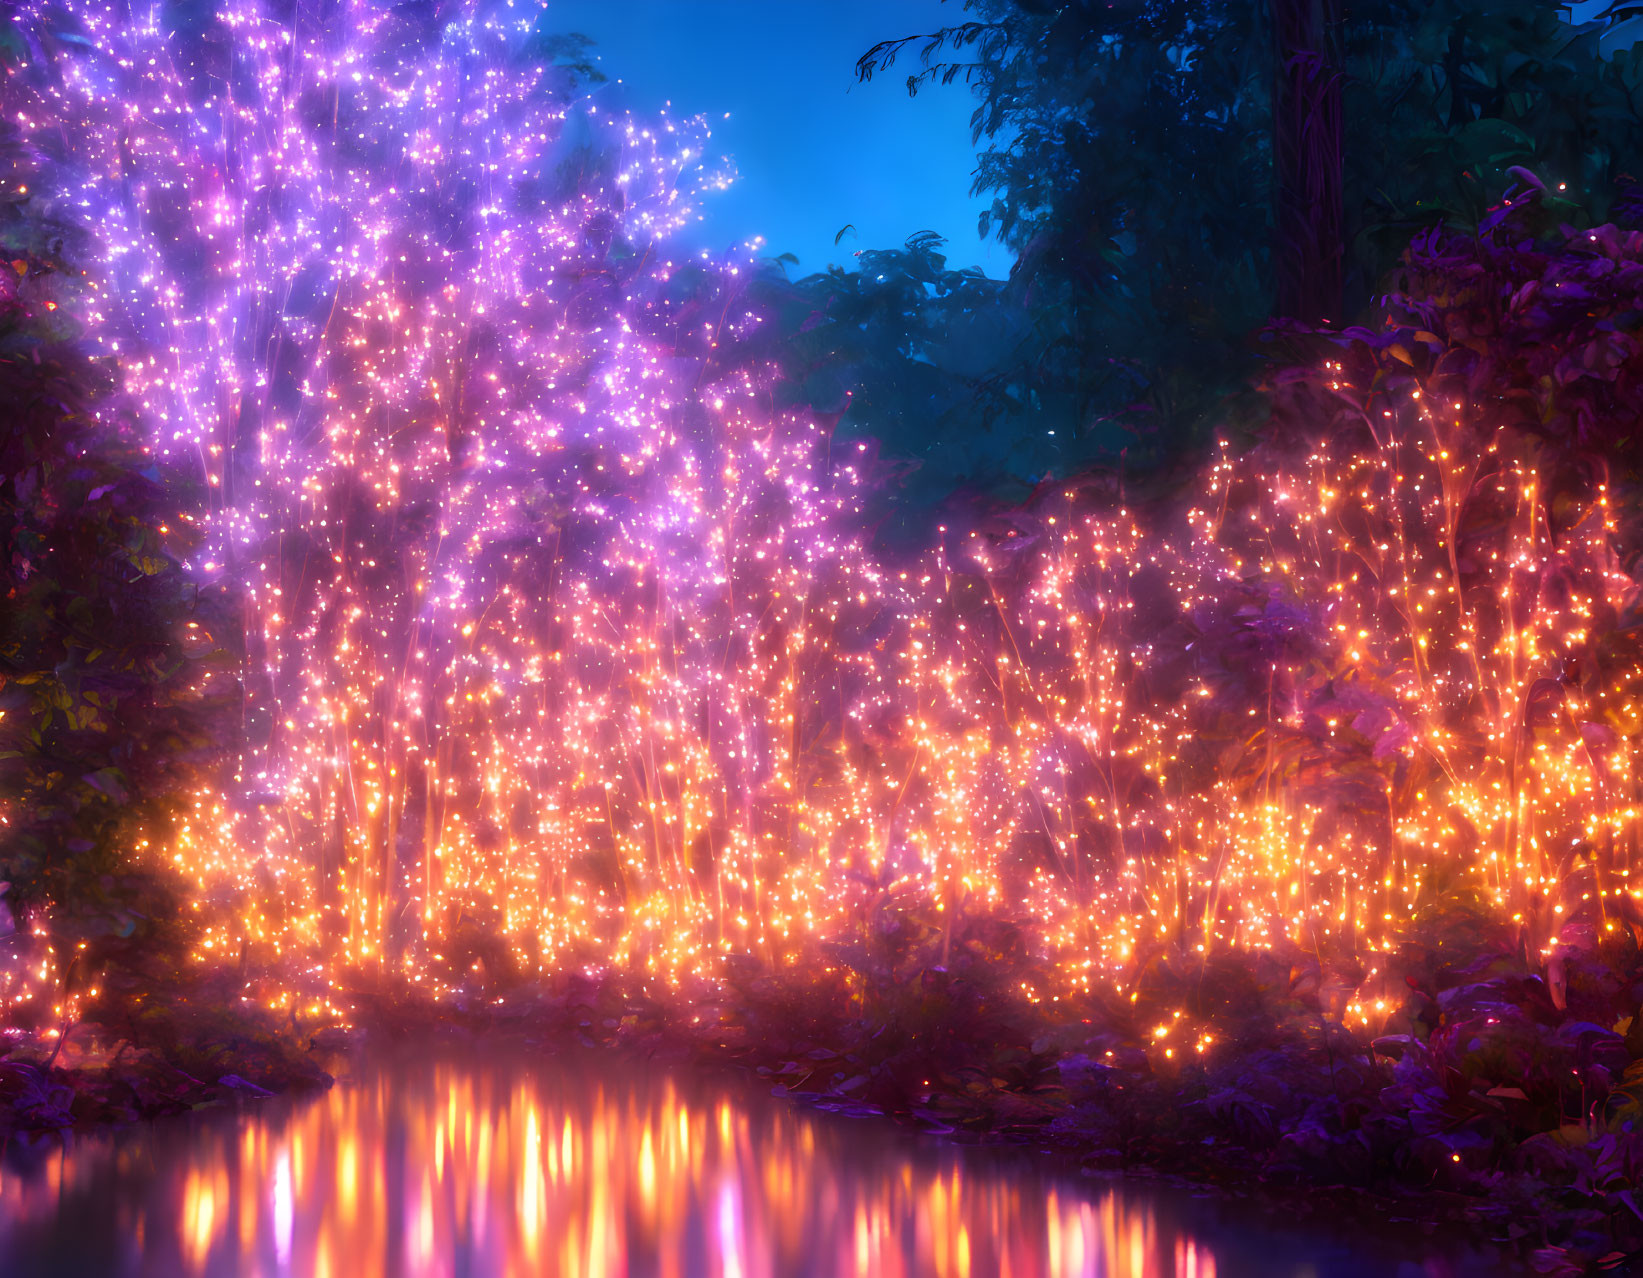 Vibrant Purple and Orange Fairy Lights in Enchanted Forest Glade